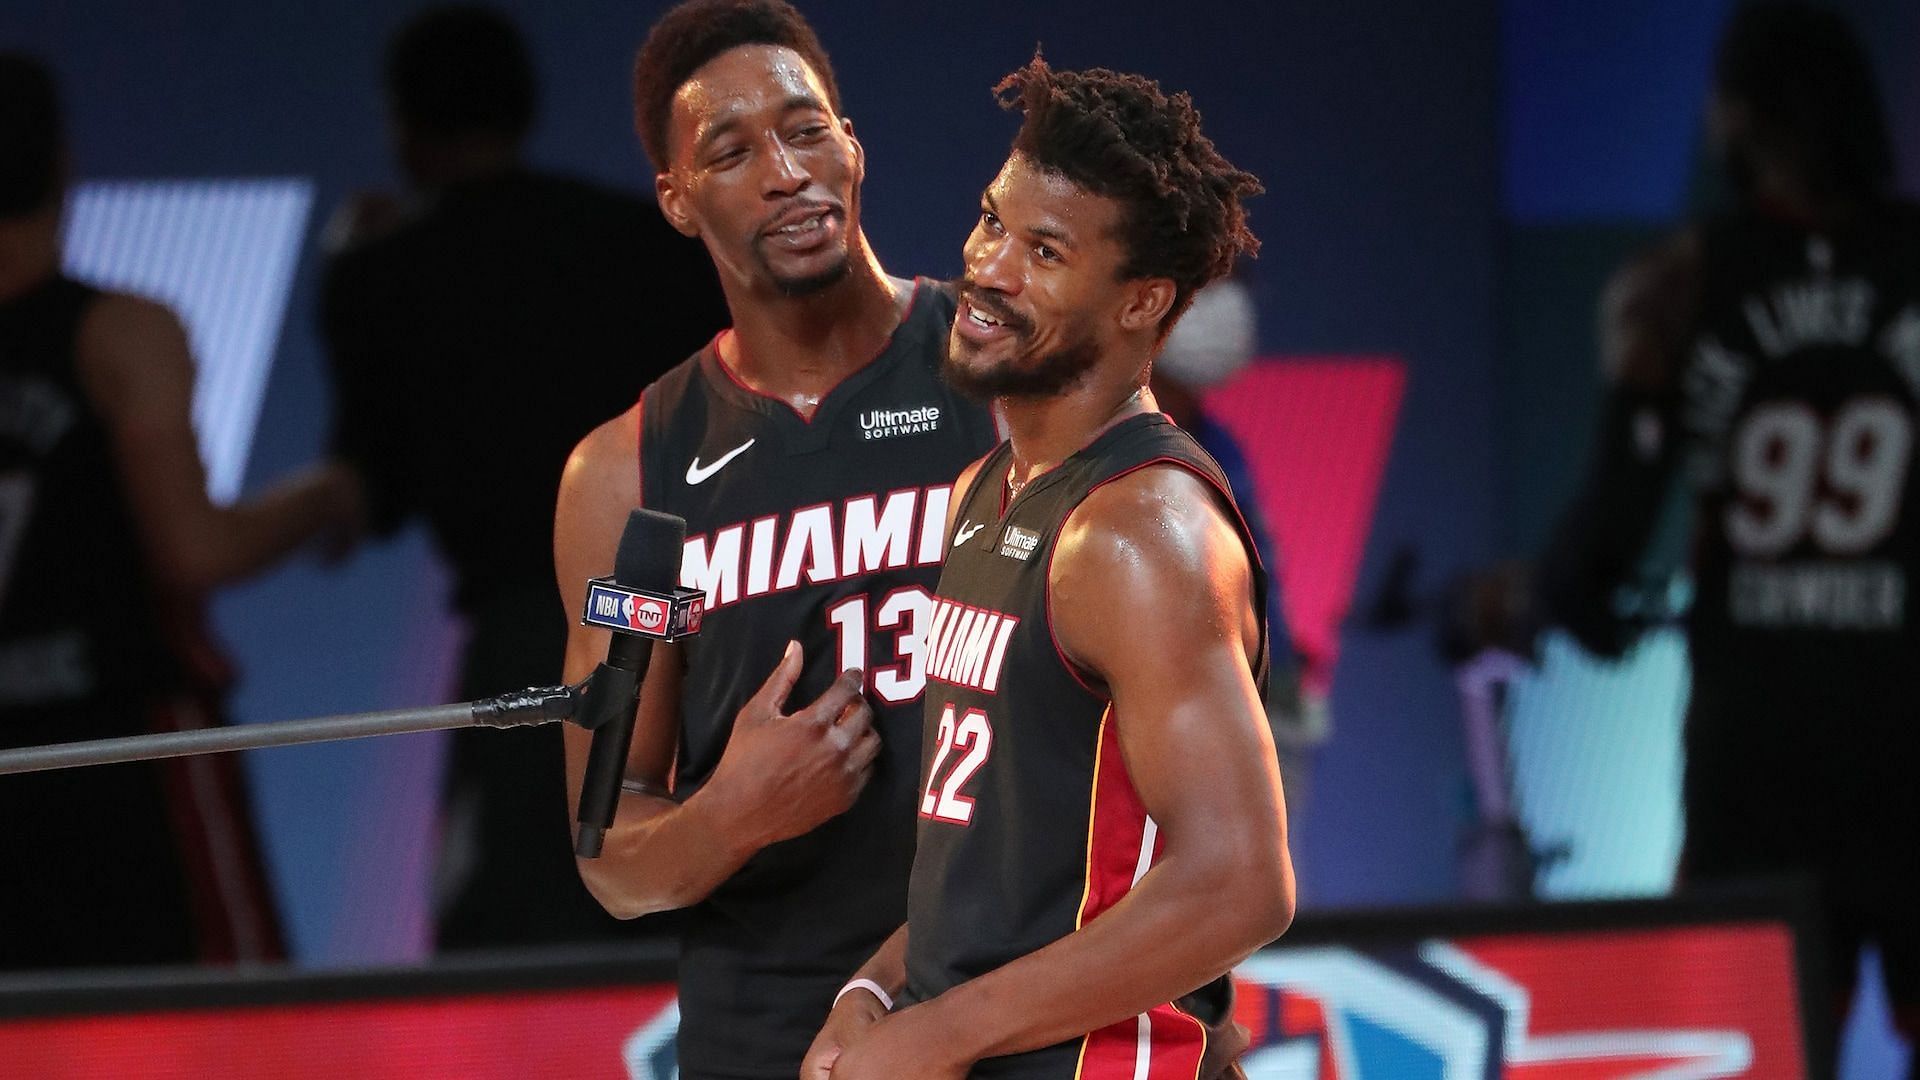 The Miami Heat could be without two of their best players against the Indiana Pacers. [Photo: NBA.com]